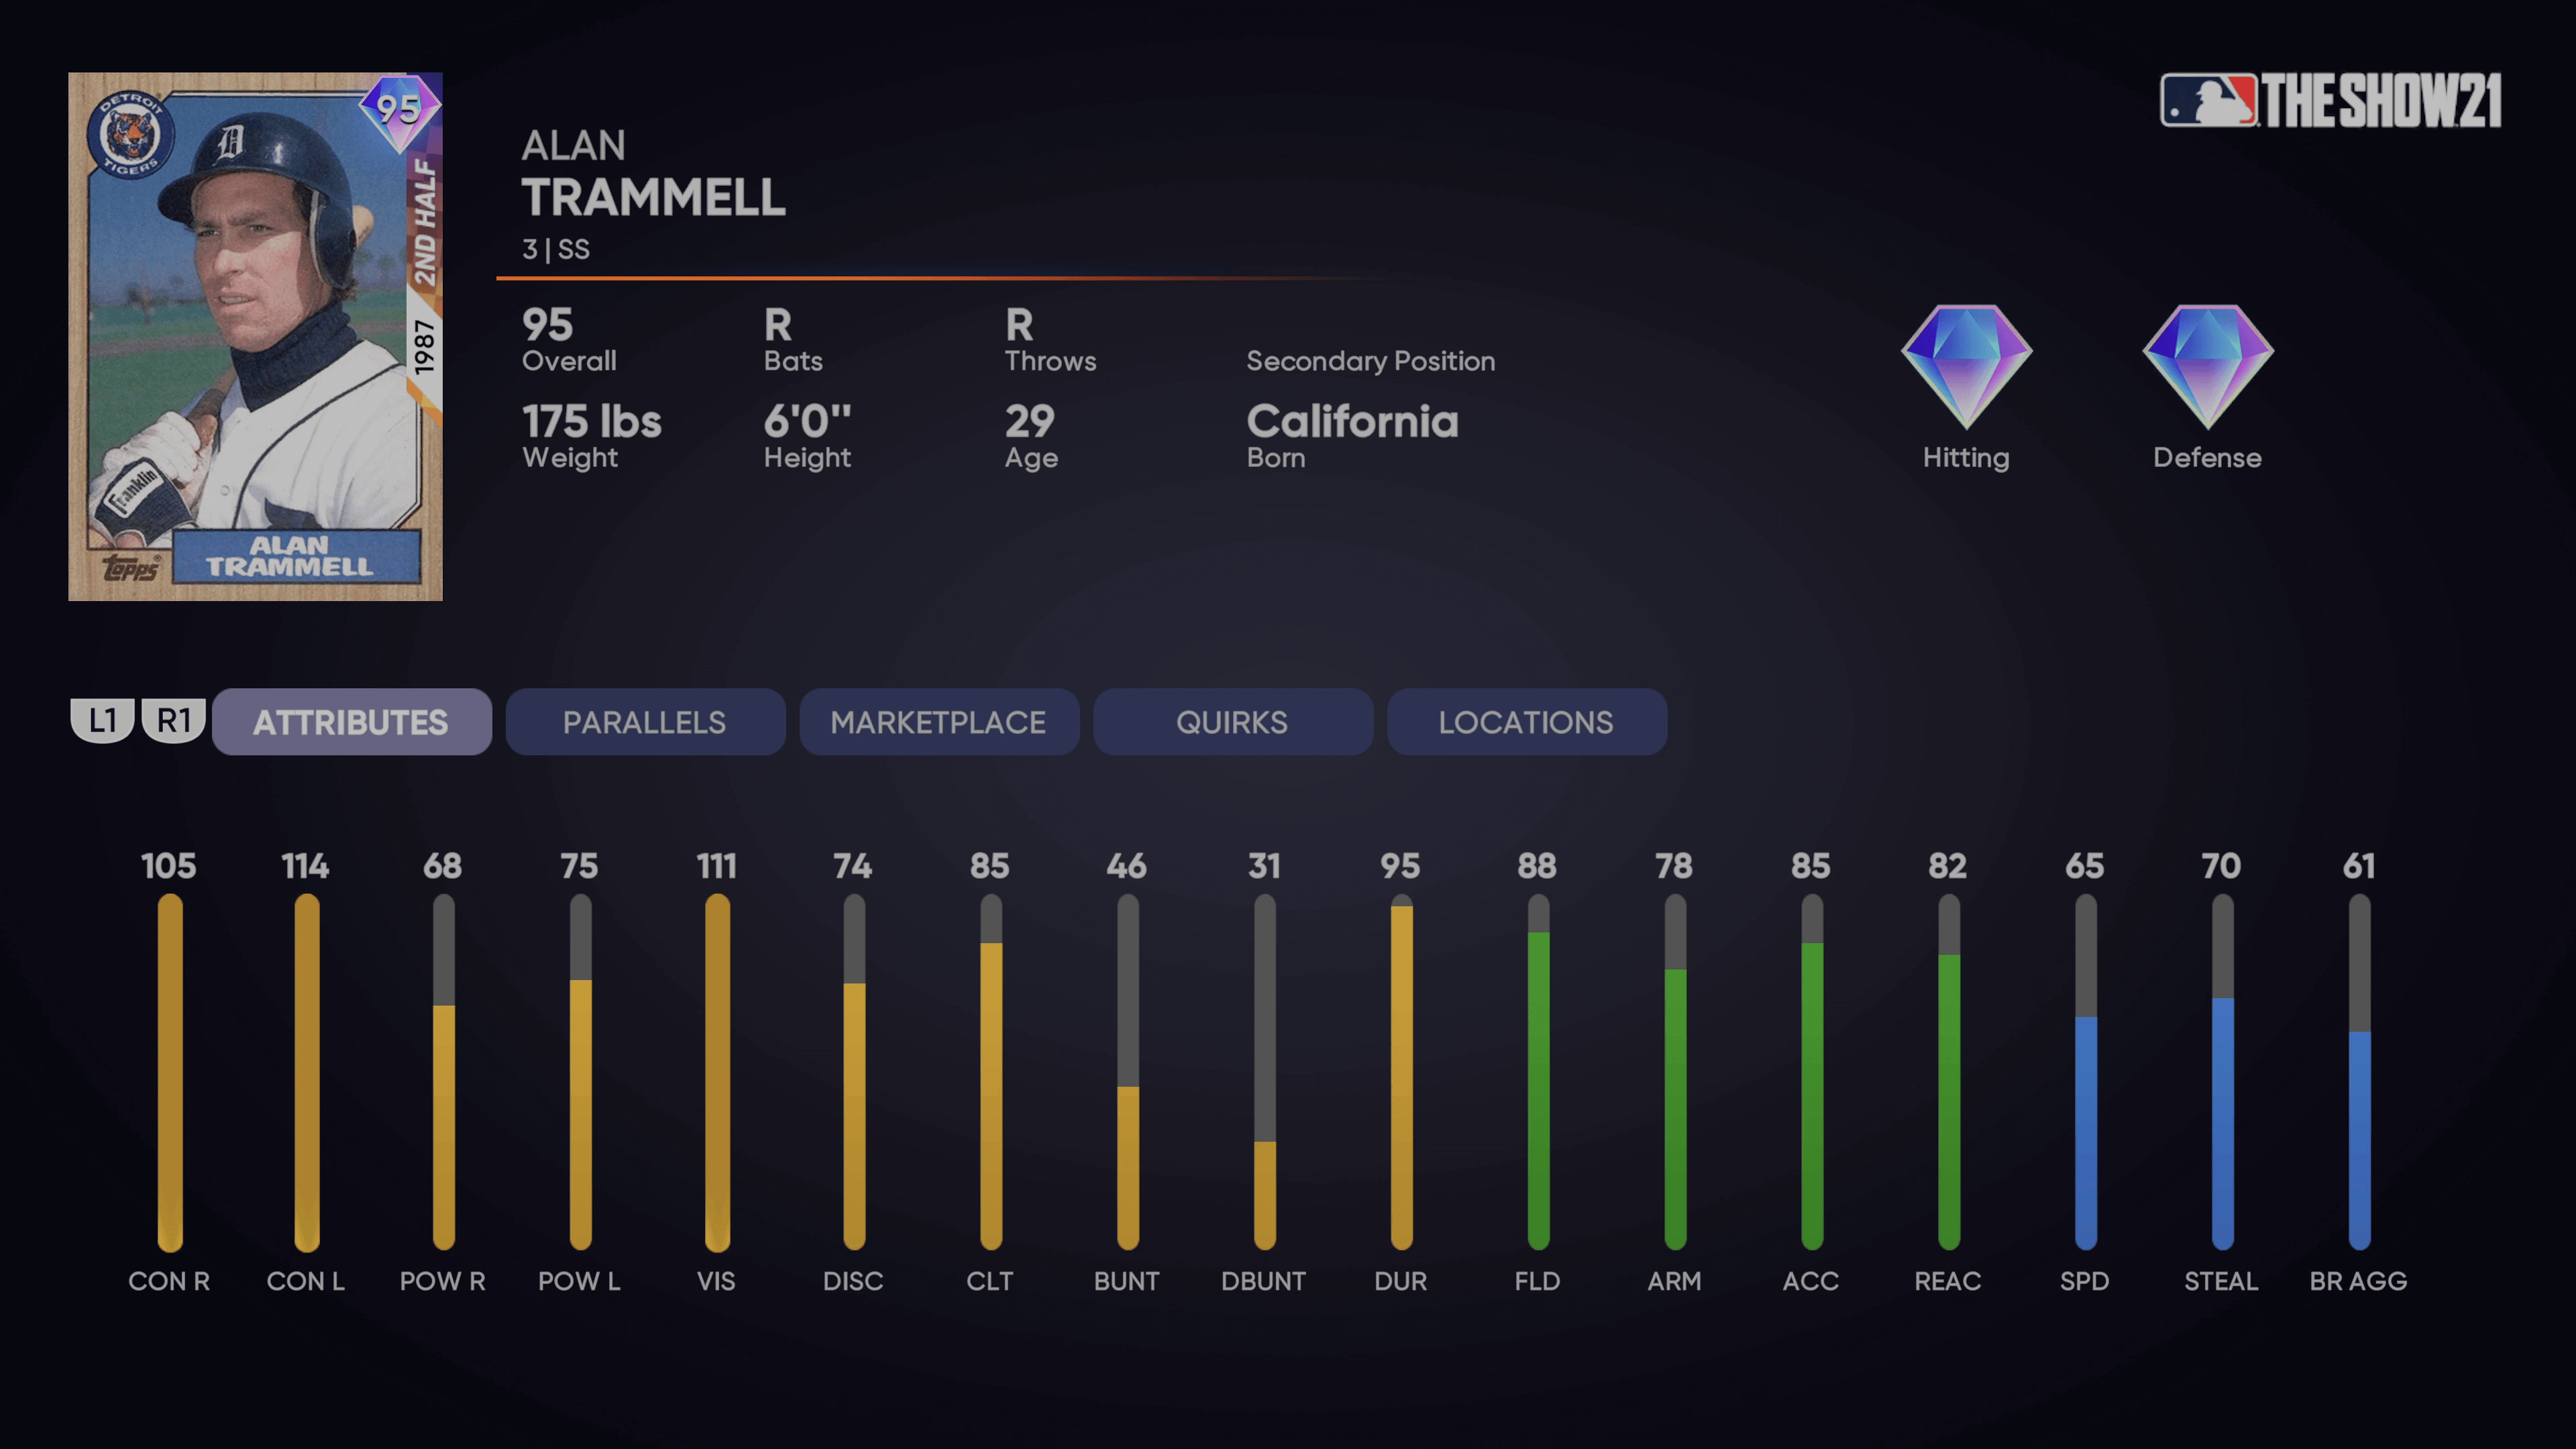 2nd Half Heroes Alan Trammell Added to 4th Inning Program